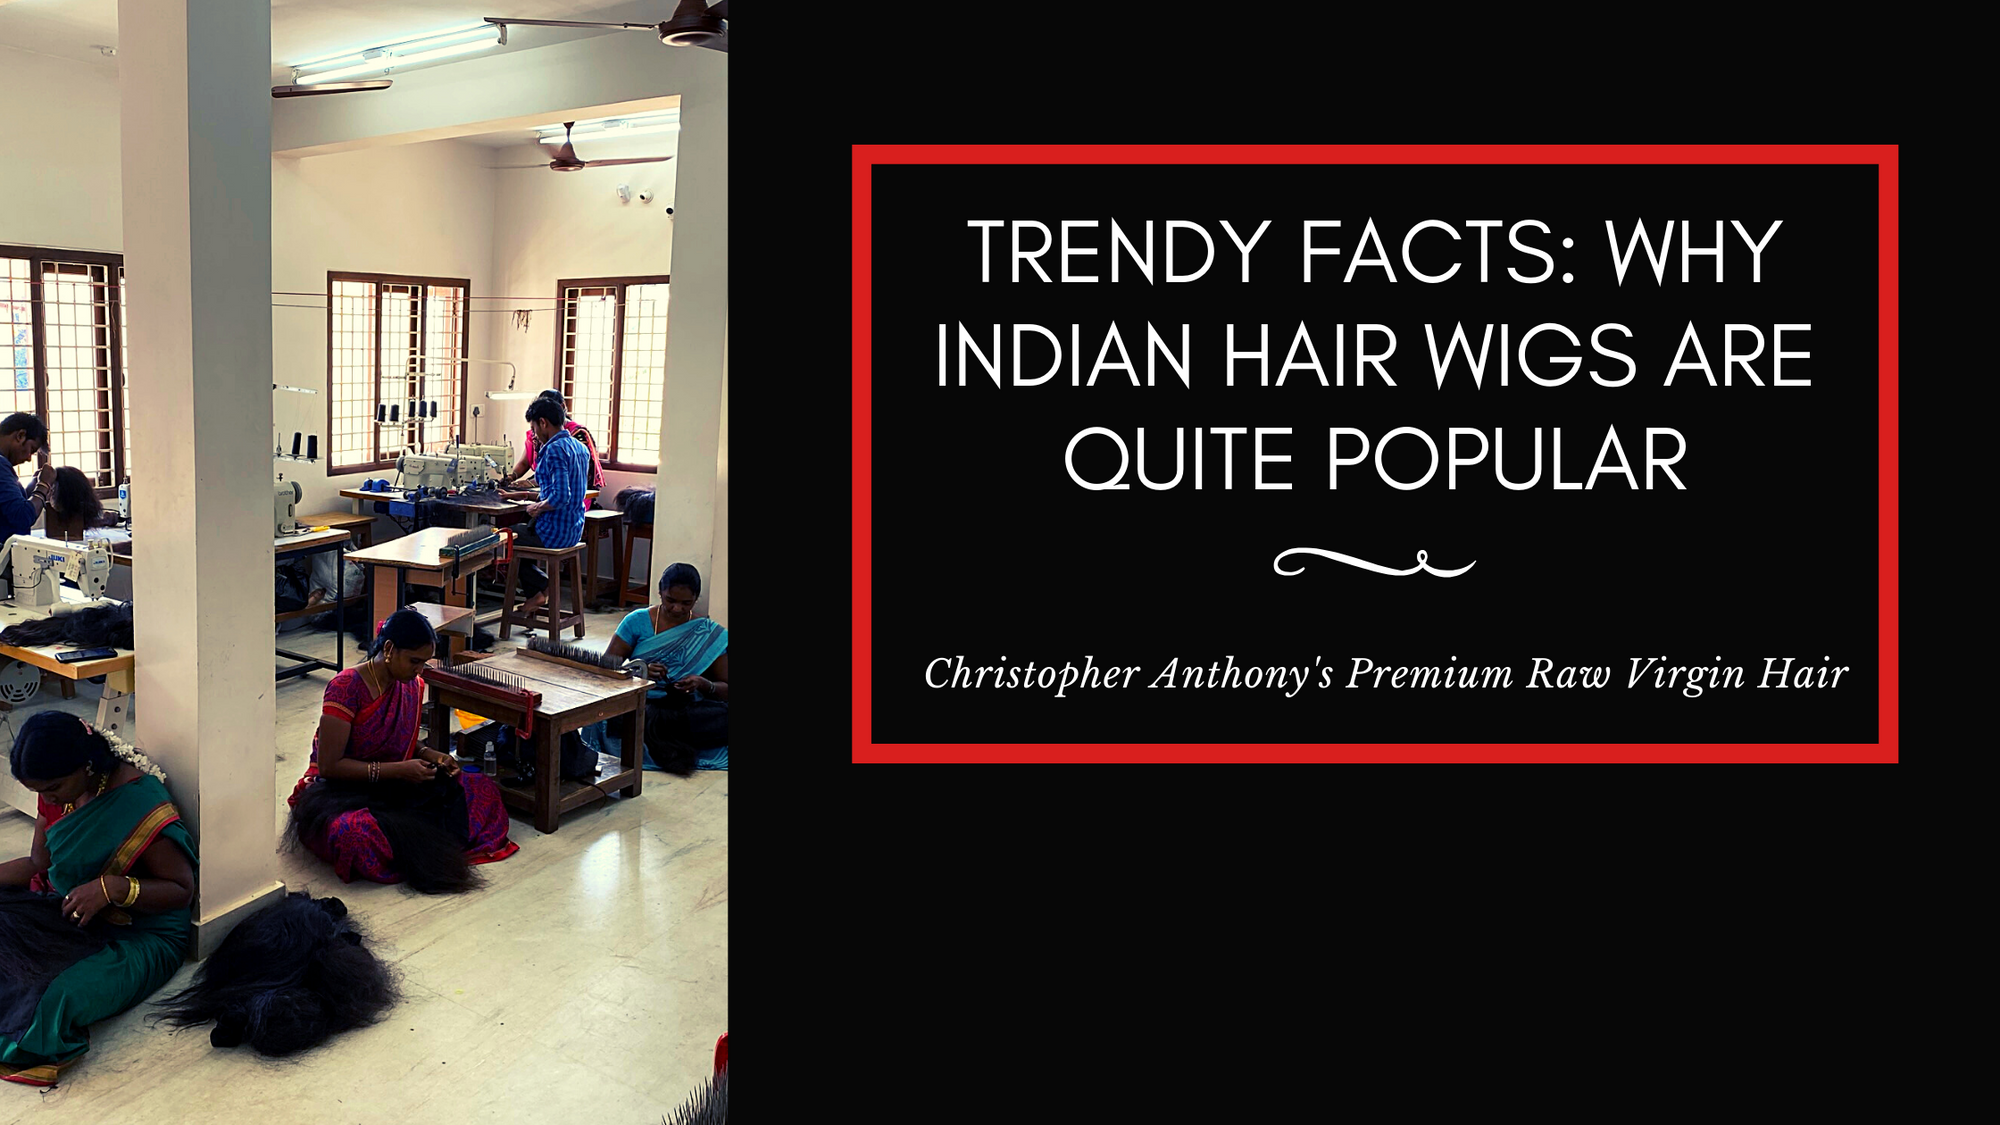 Trendy Facts: Why Indian Hair Wigs Are So Popular